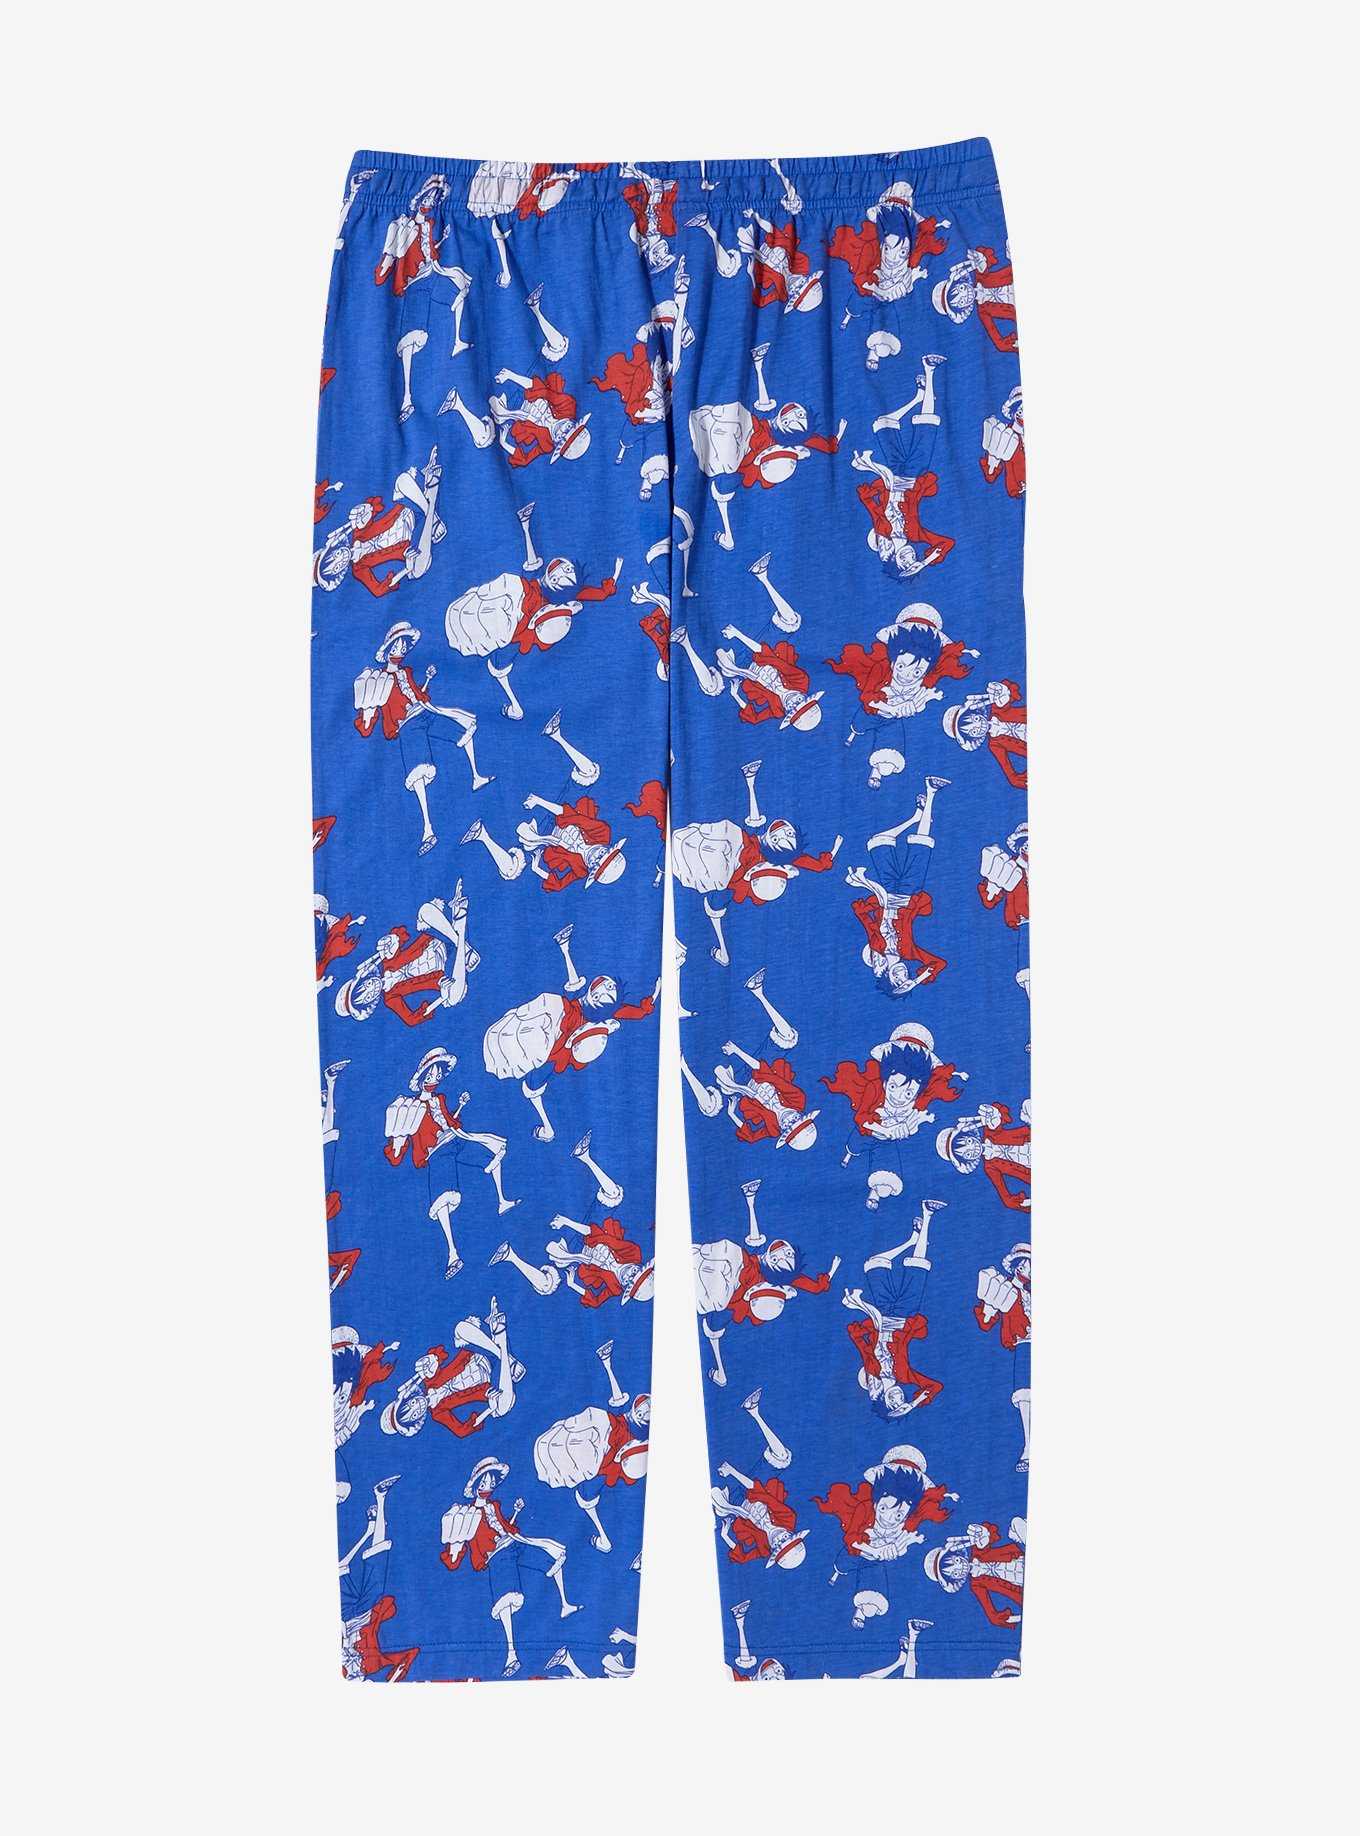 One Piece Monkey D. Luffy Poses Sleep Pants - BoxLunch Exclusive, , hi-res